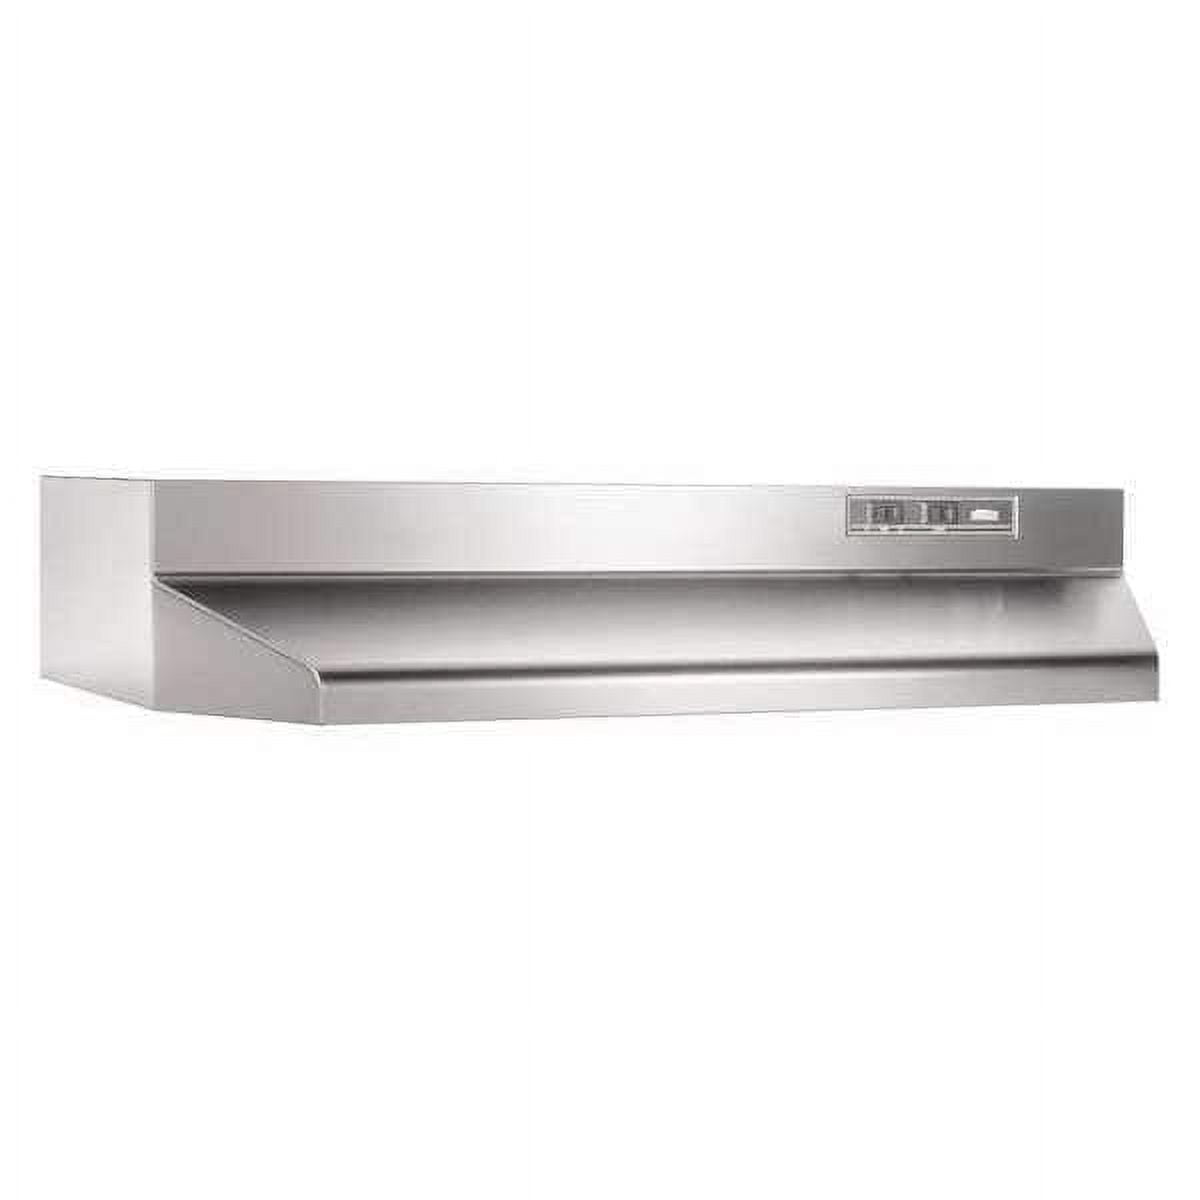 Hermitlux Range Hood Insert 30 inch, Washable Baffle filters, with Charcoal  Filters, ‎HMX-USB13G70-AC 